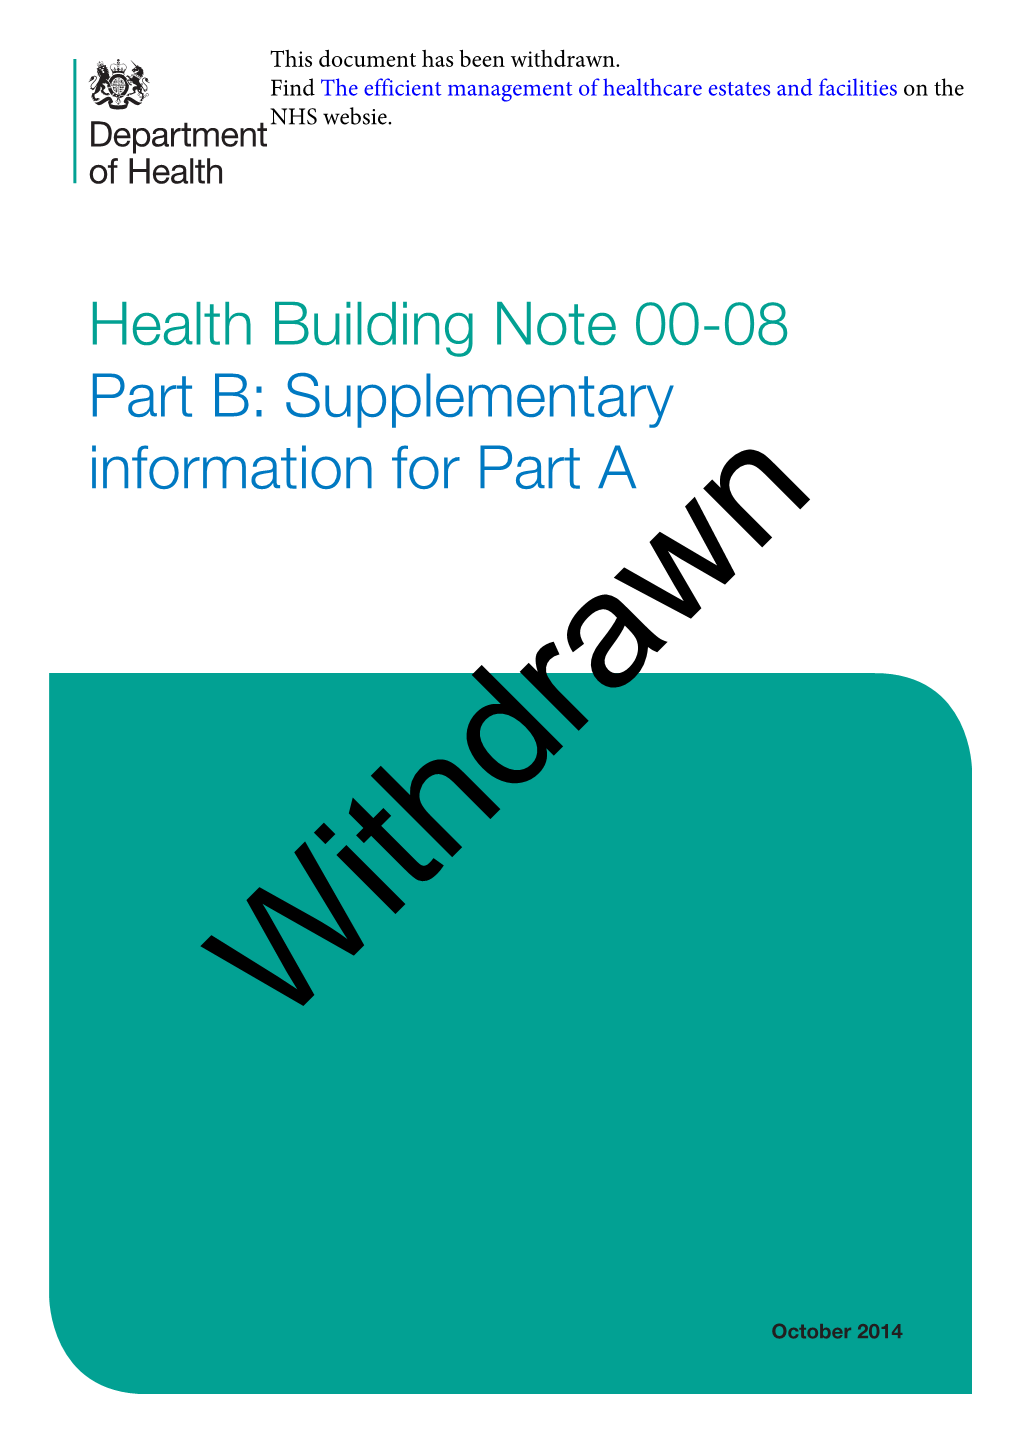 Health Building Note 00-08 Part B: Supplementary Information for Part A